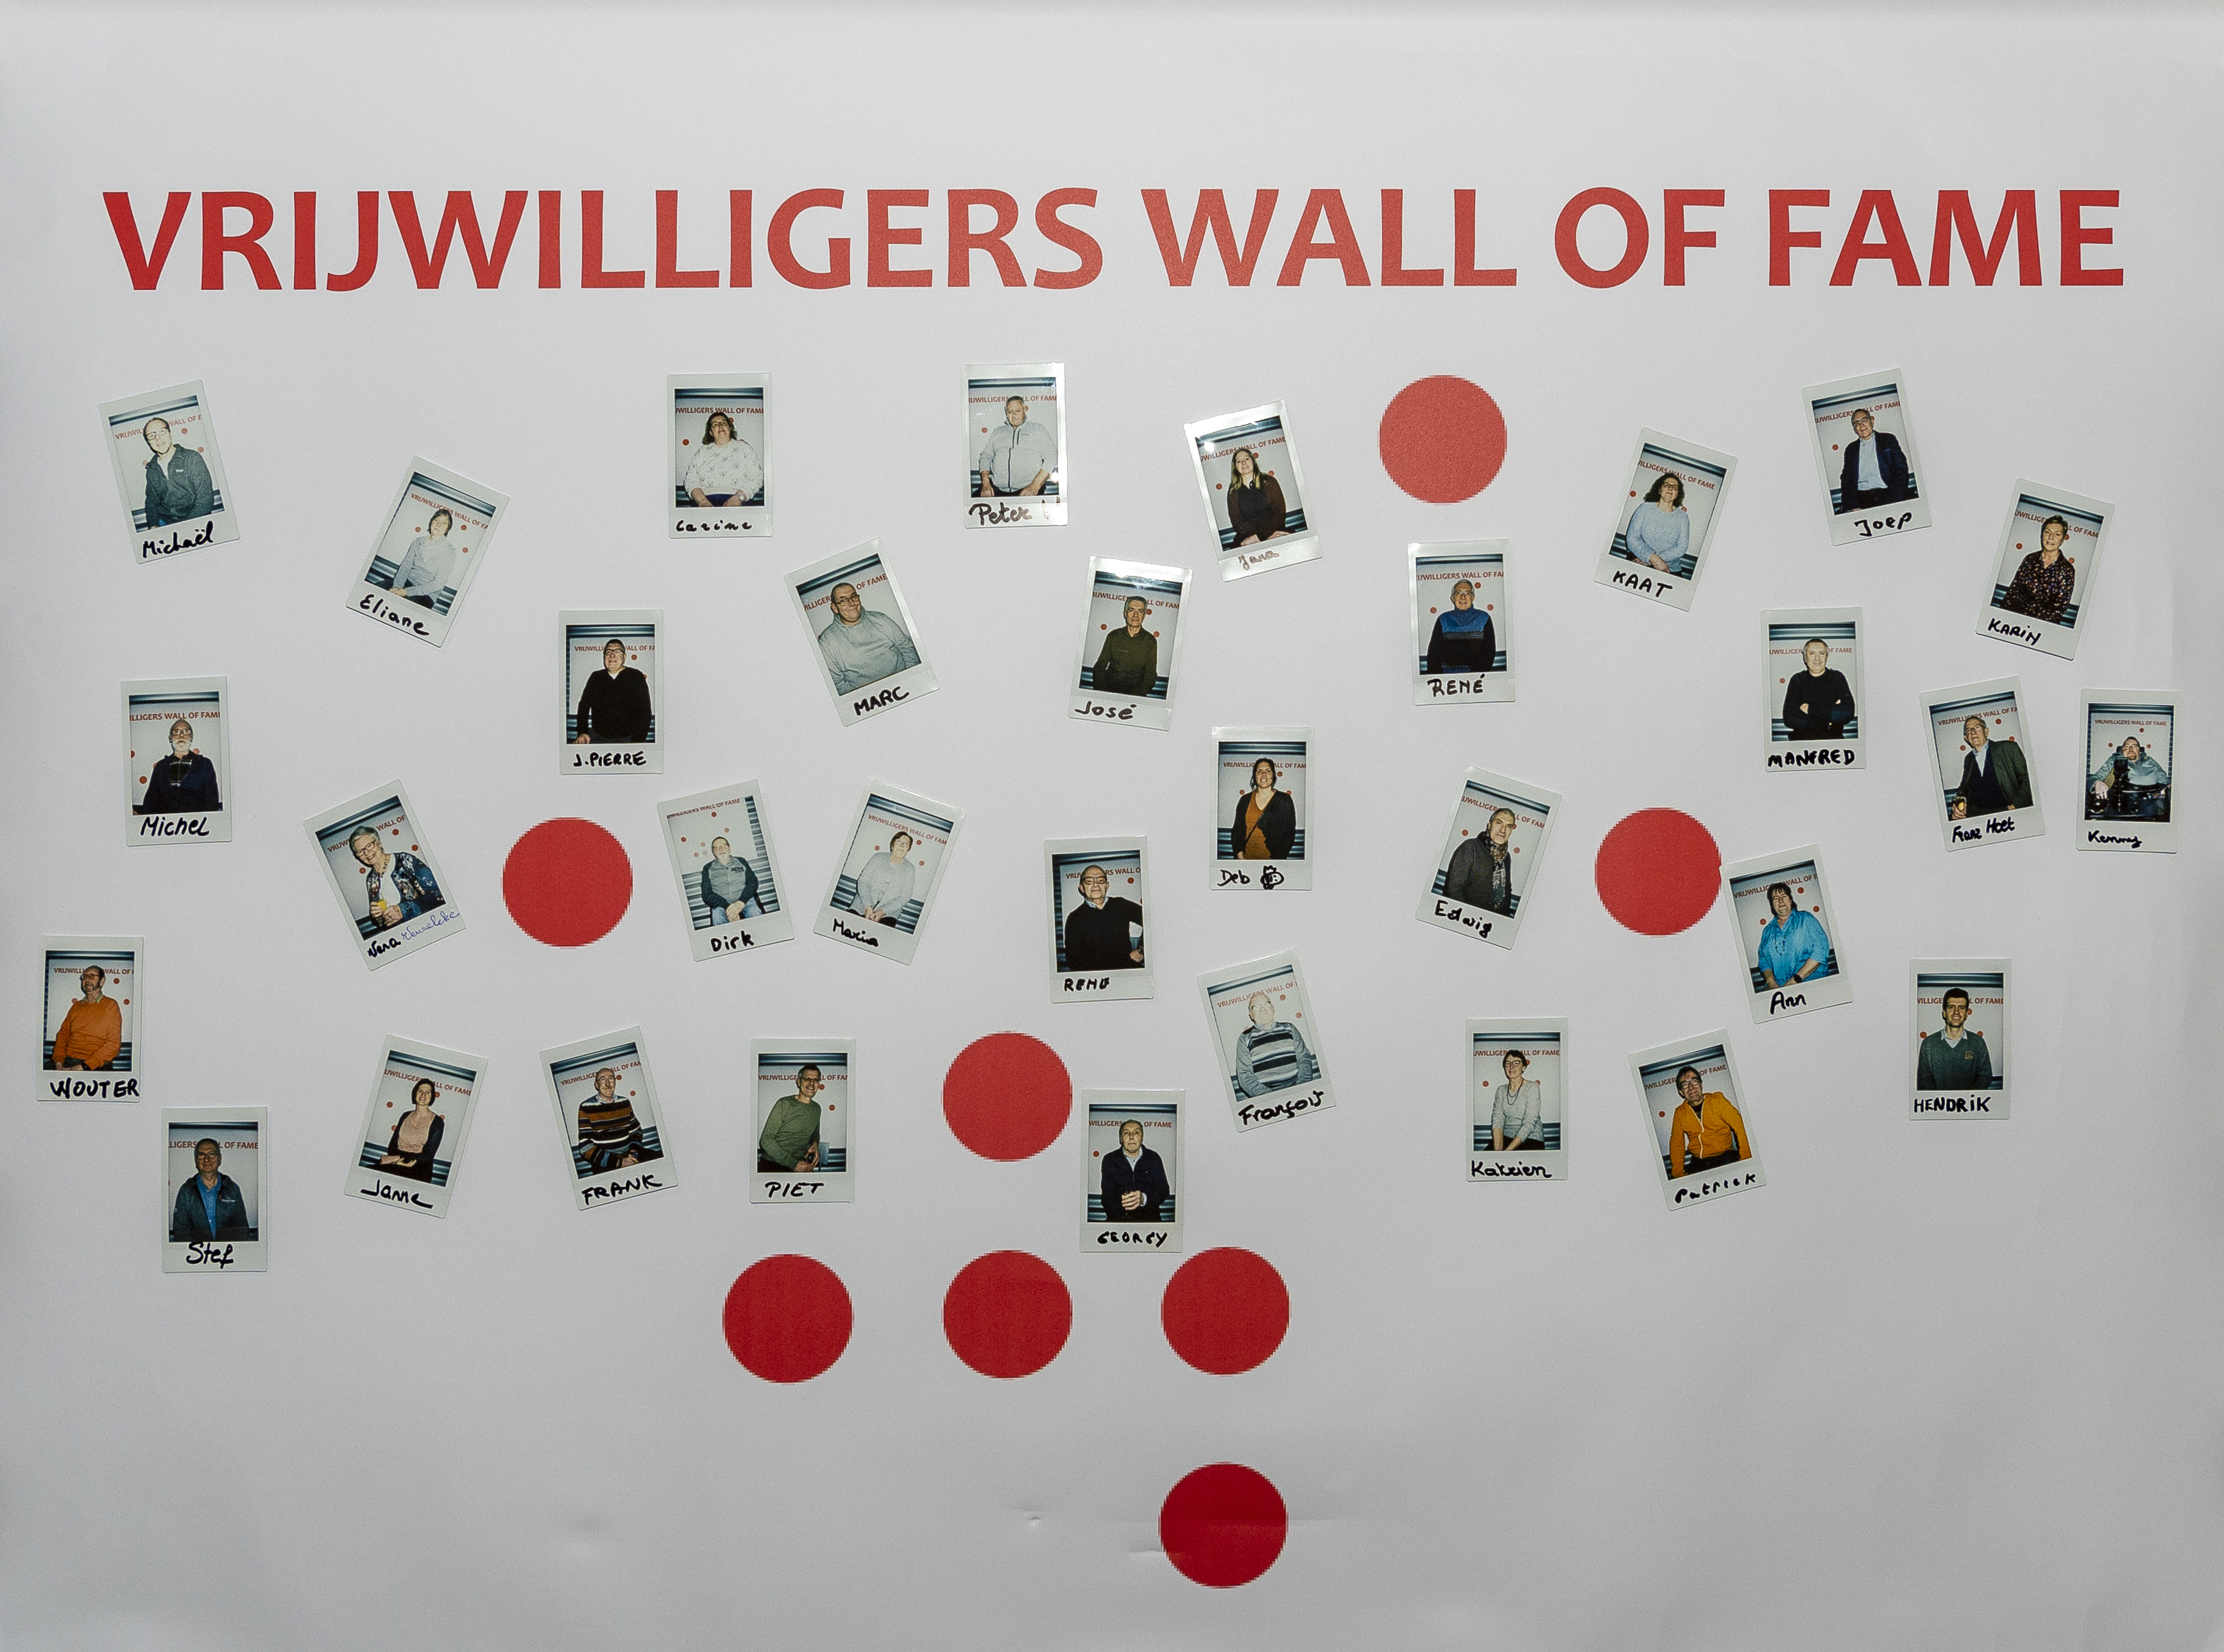 Vrijwilligers 'Wall of Fame"